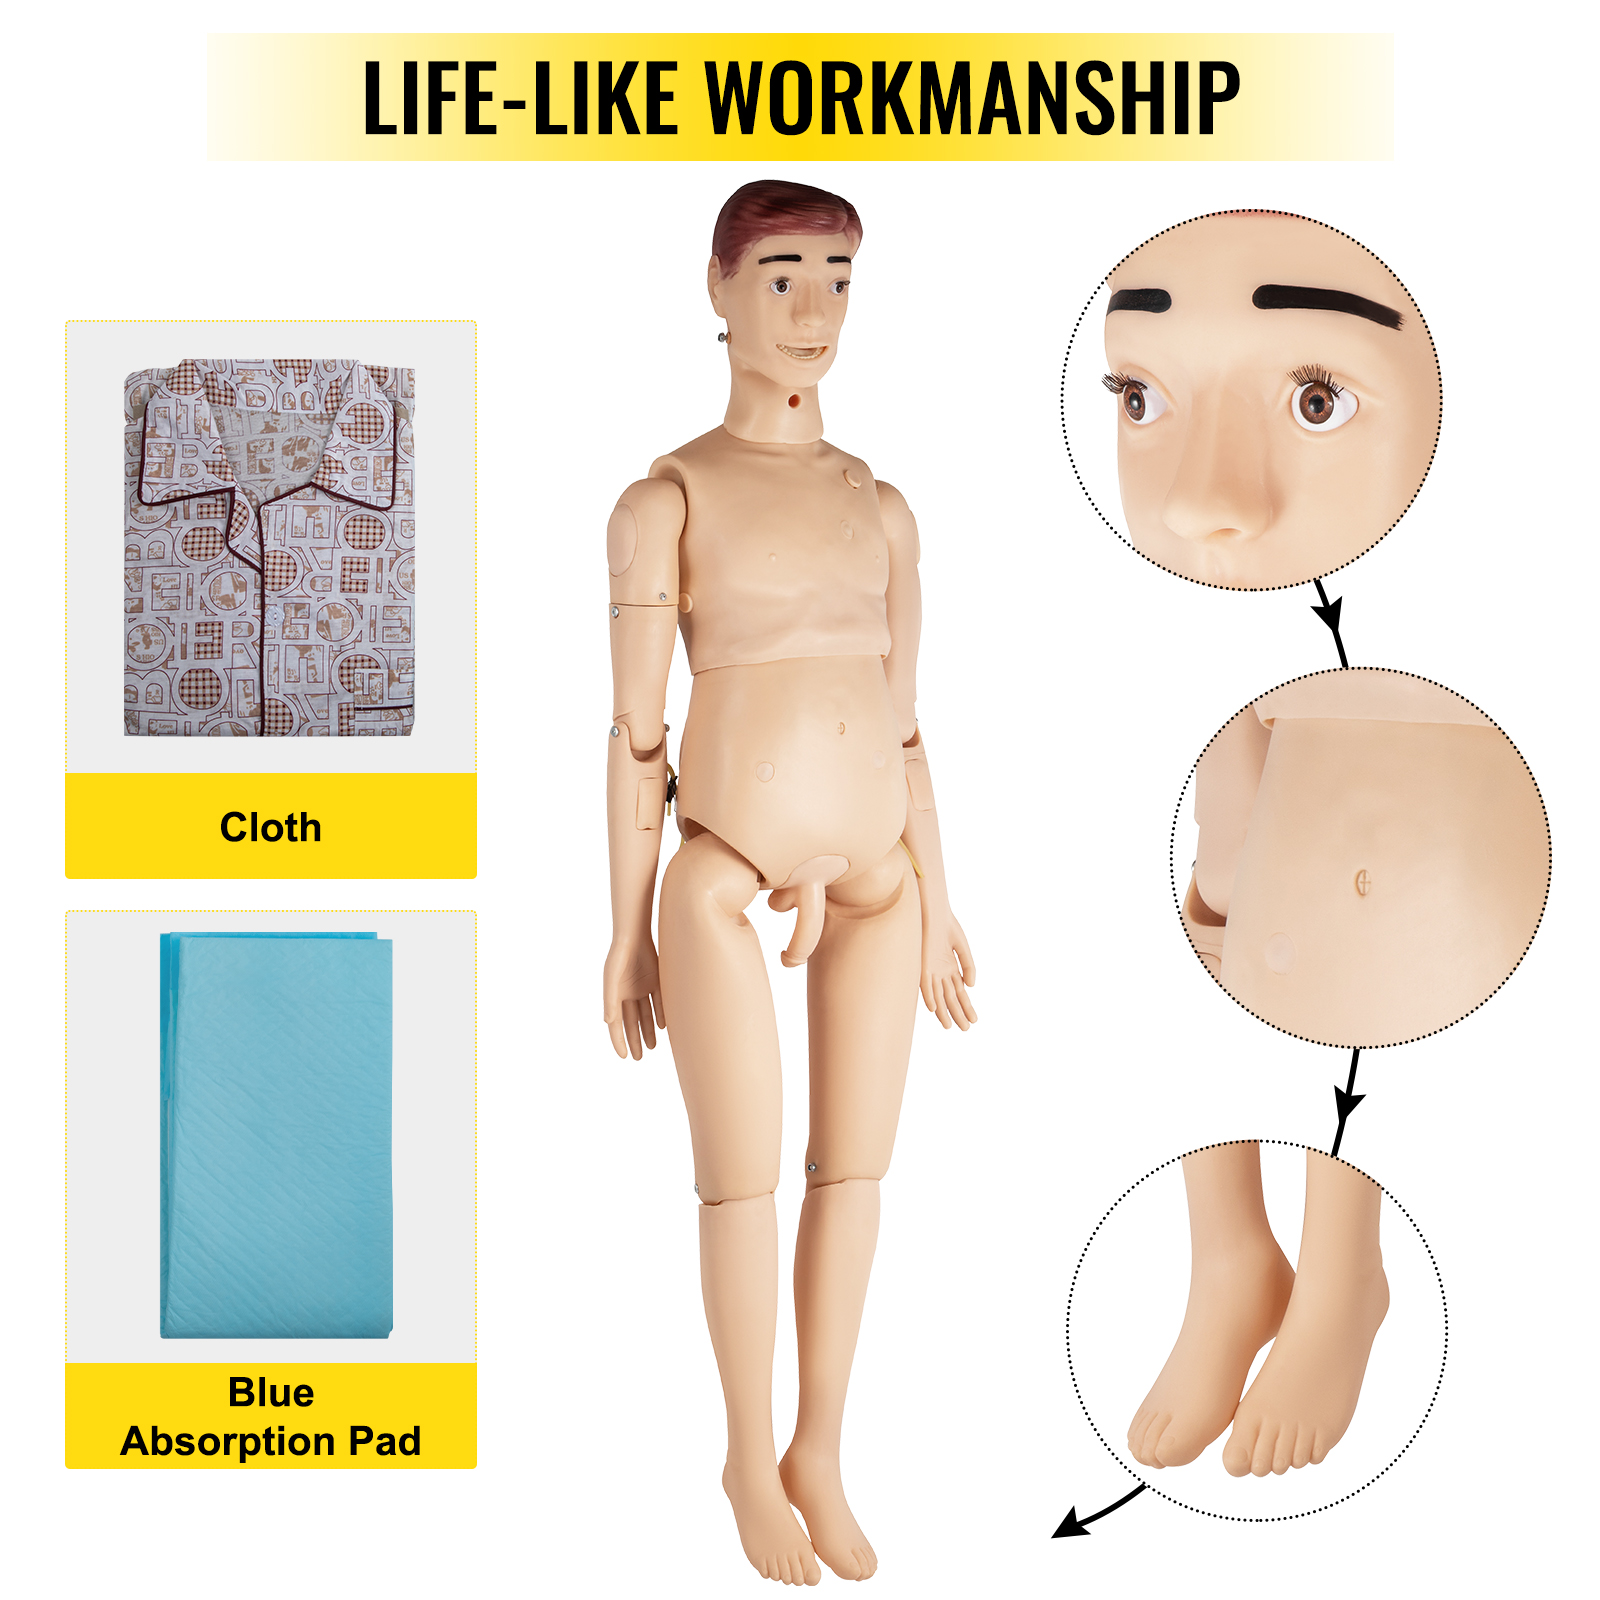 Learning with mannequins, Wellness